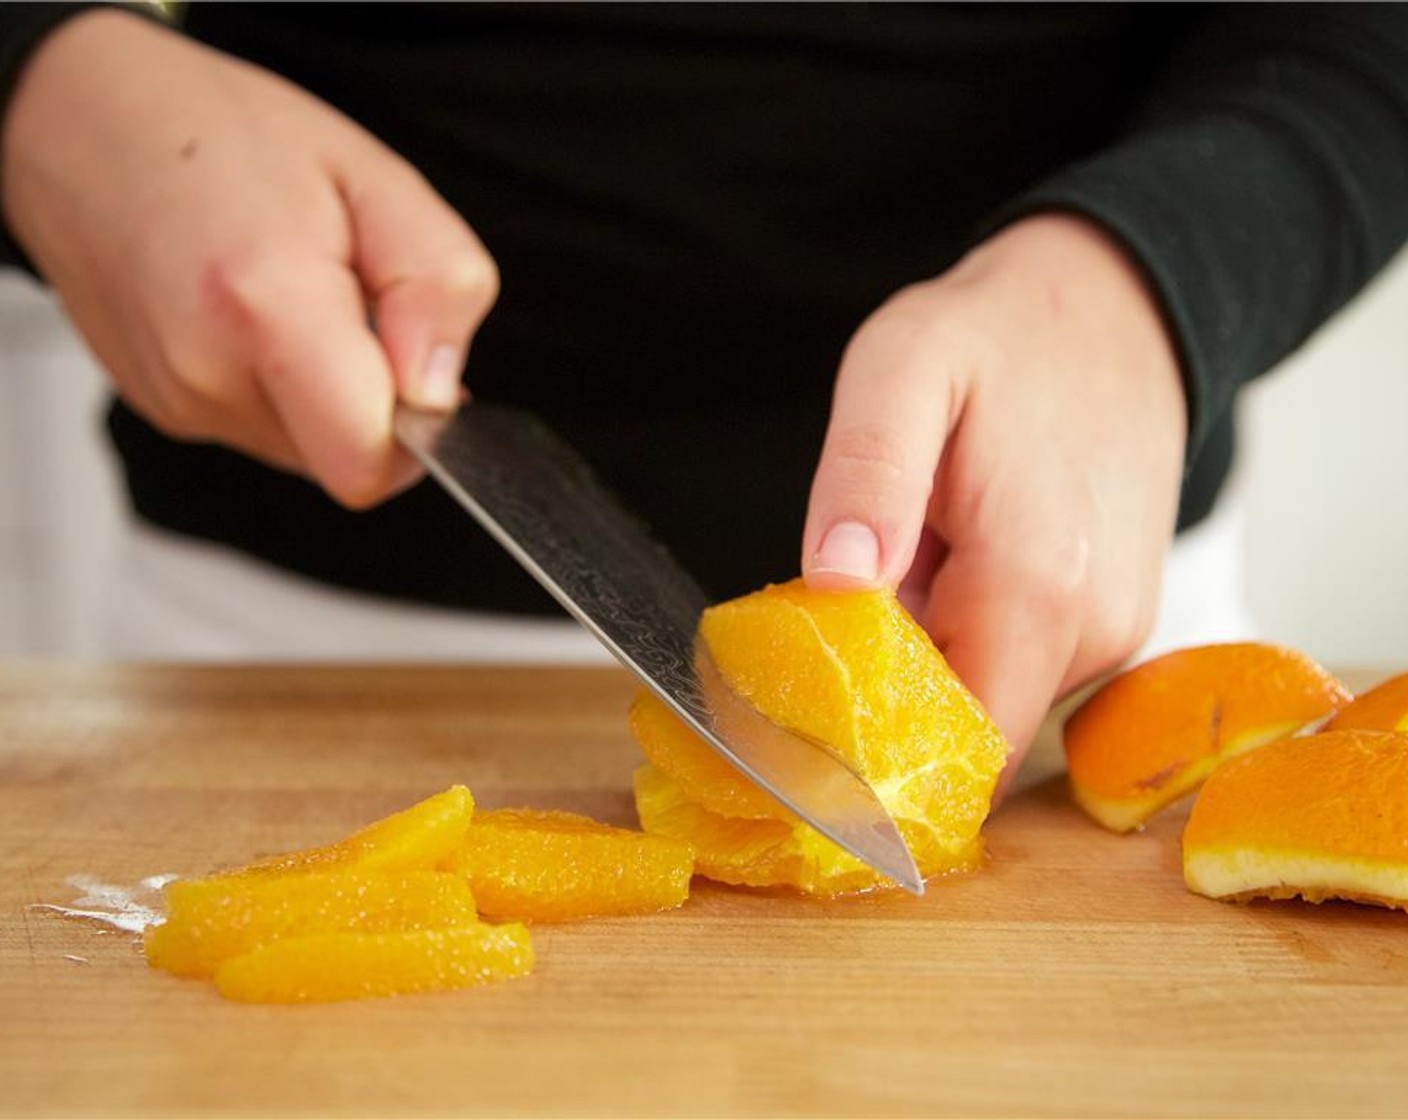 step 5 Zest the Oranges (2 1/2 Tbsp) and set aside. Slice off the bottom and top. Using even downward strokes, slice the skin away from the flesh. Discard skin, and remove any remaining white pith. Cut between the membranes to segment the orange.